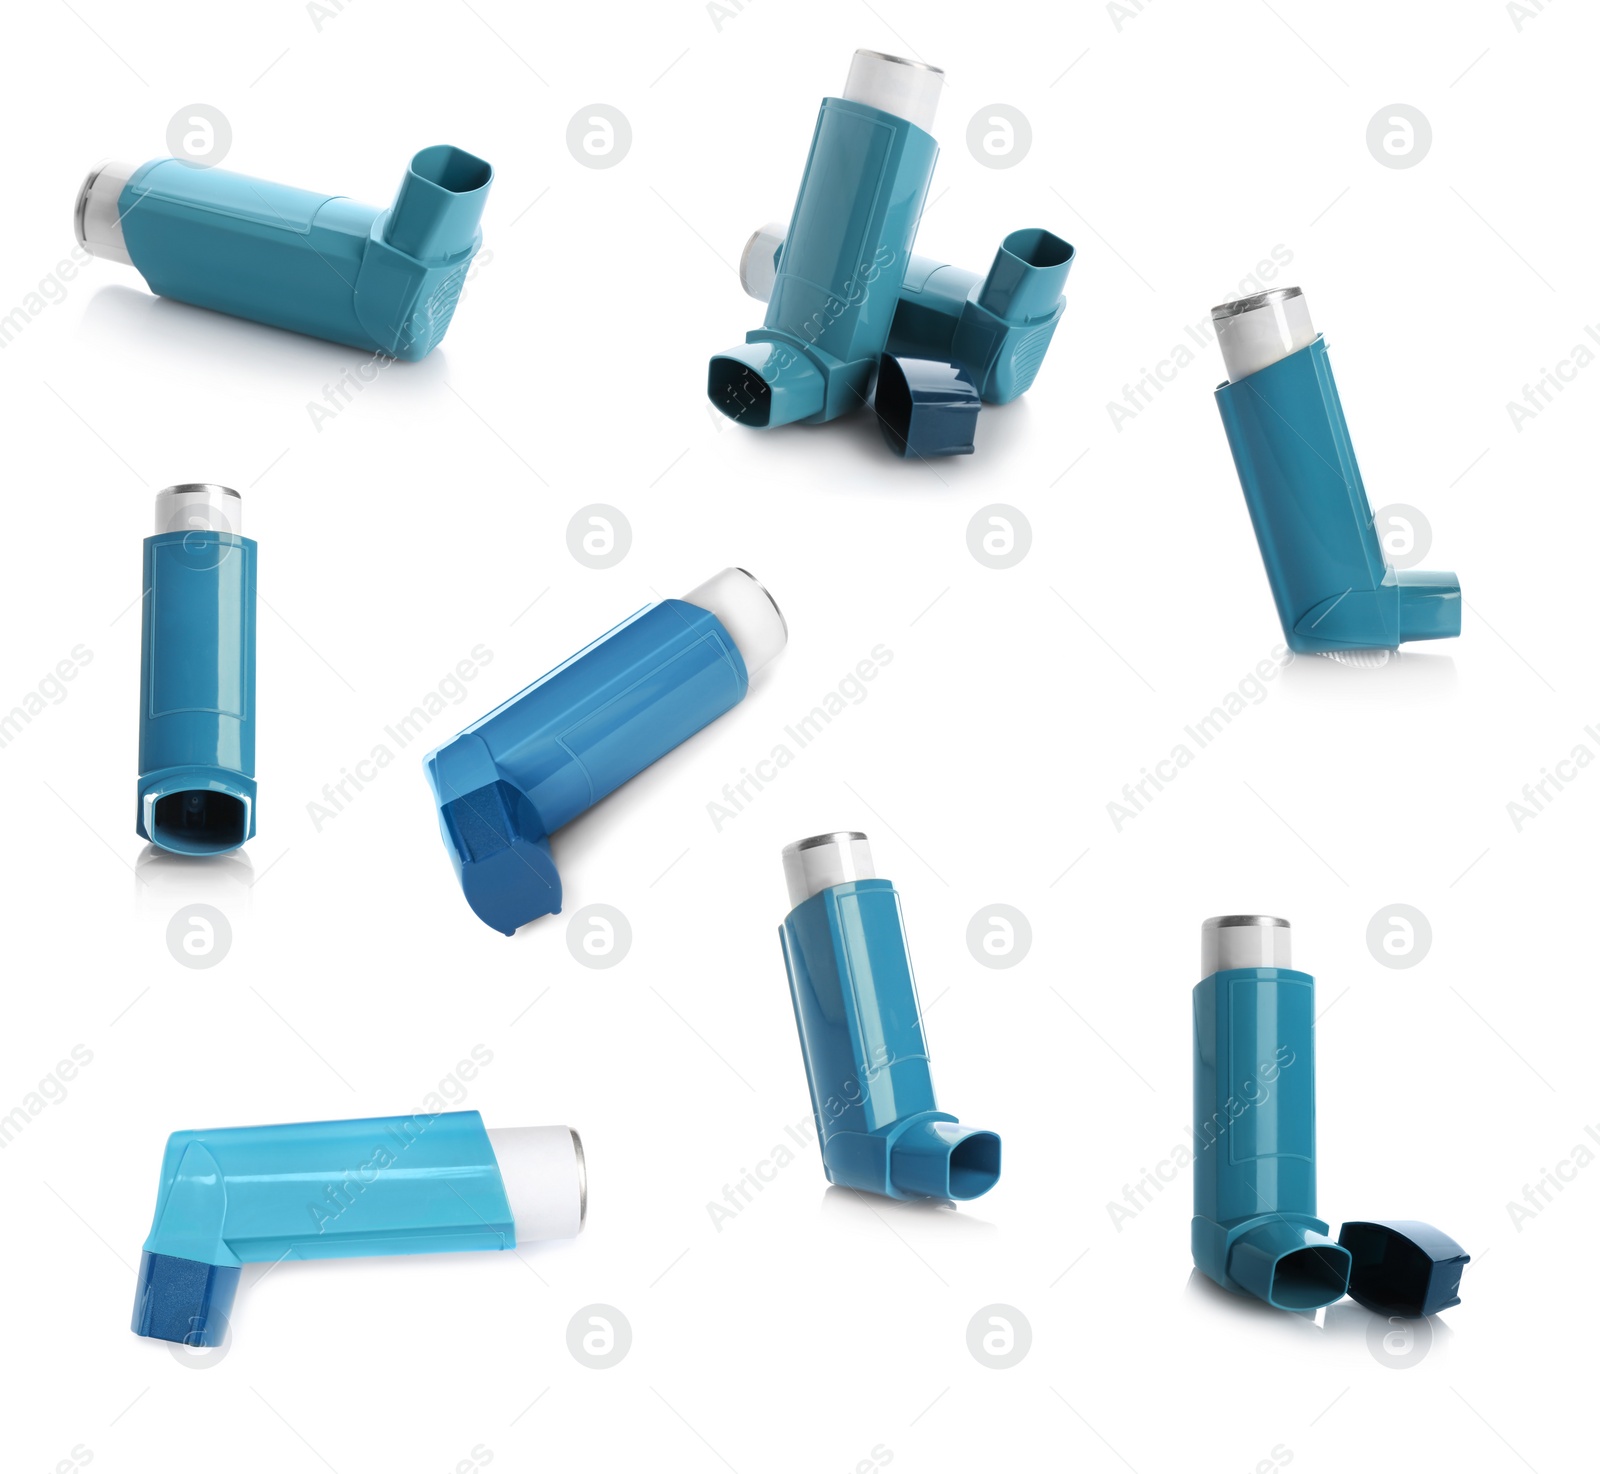 Image of Set with portable asthma inhalers on white background